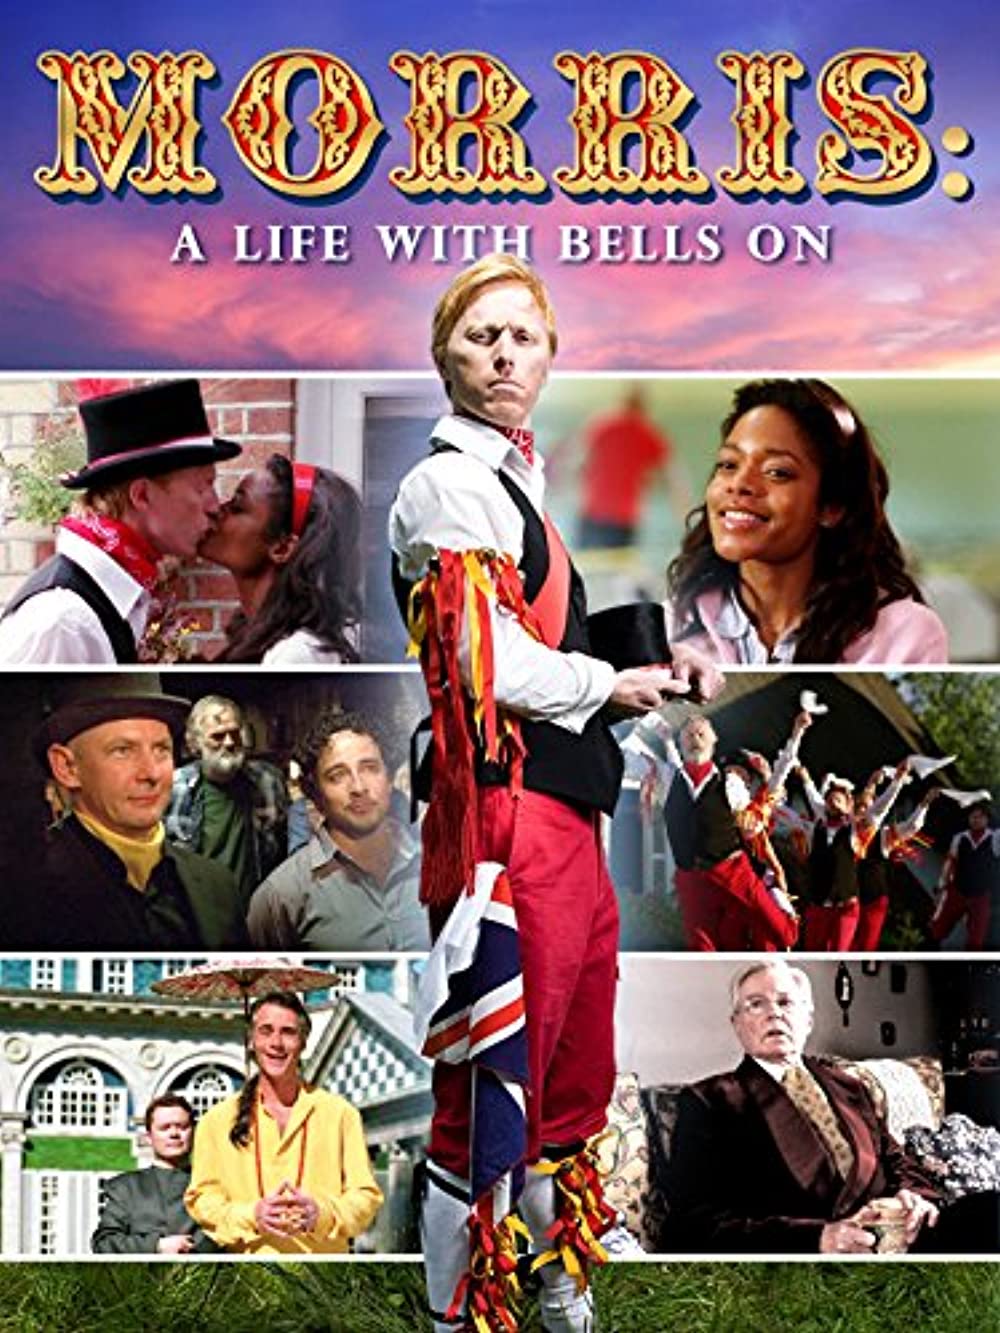 Download Morris: A Life with Bells On Movie | Morris: A Life With Bells On Movie Review